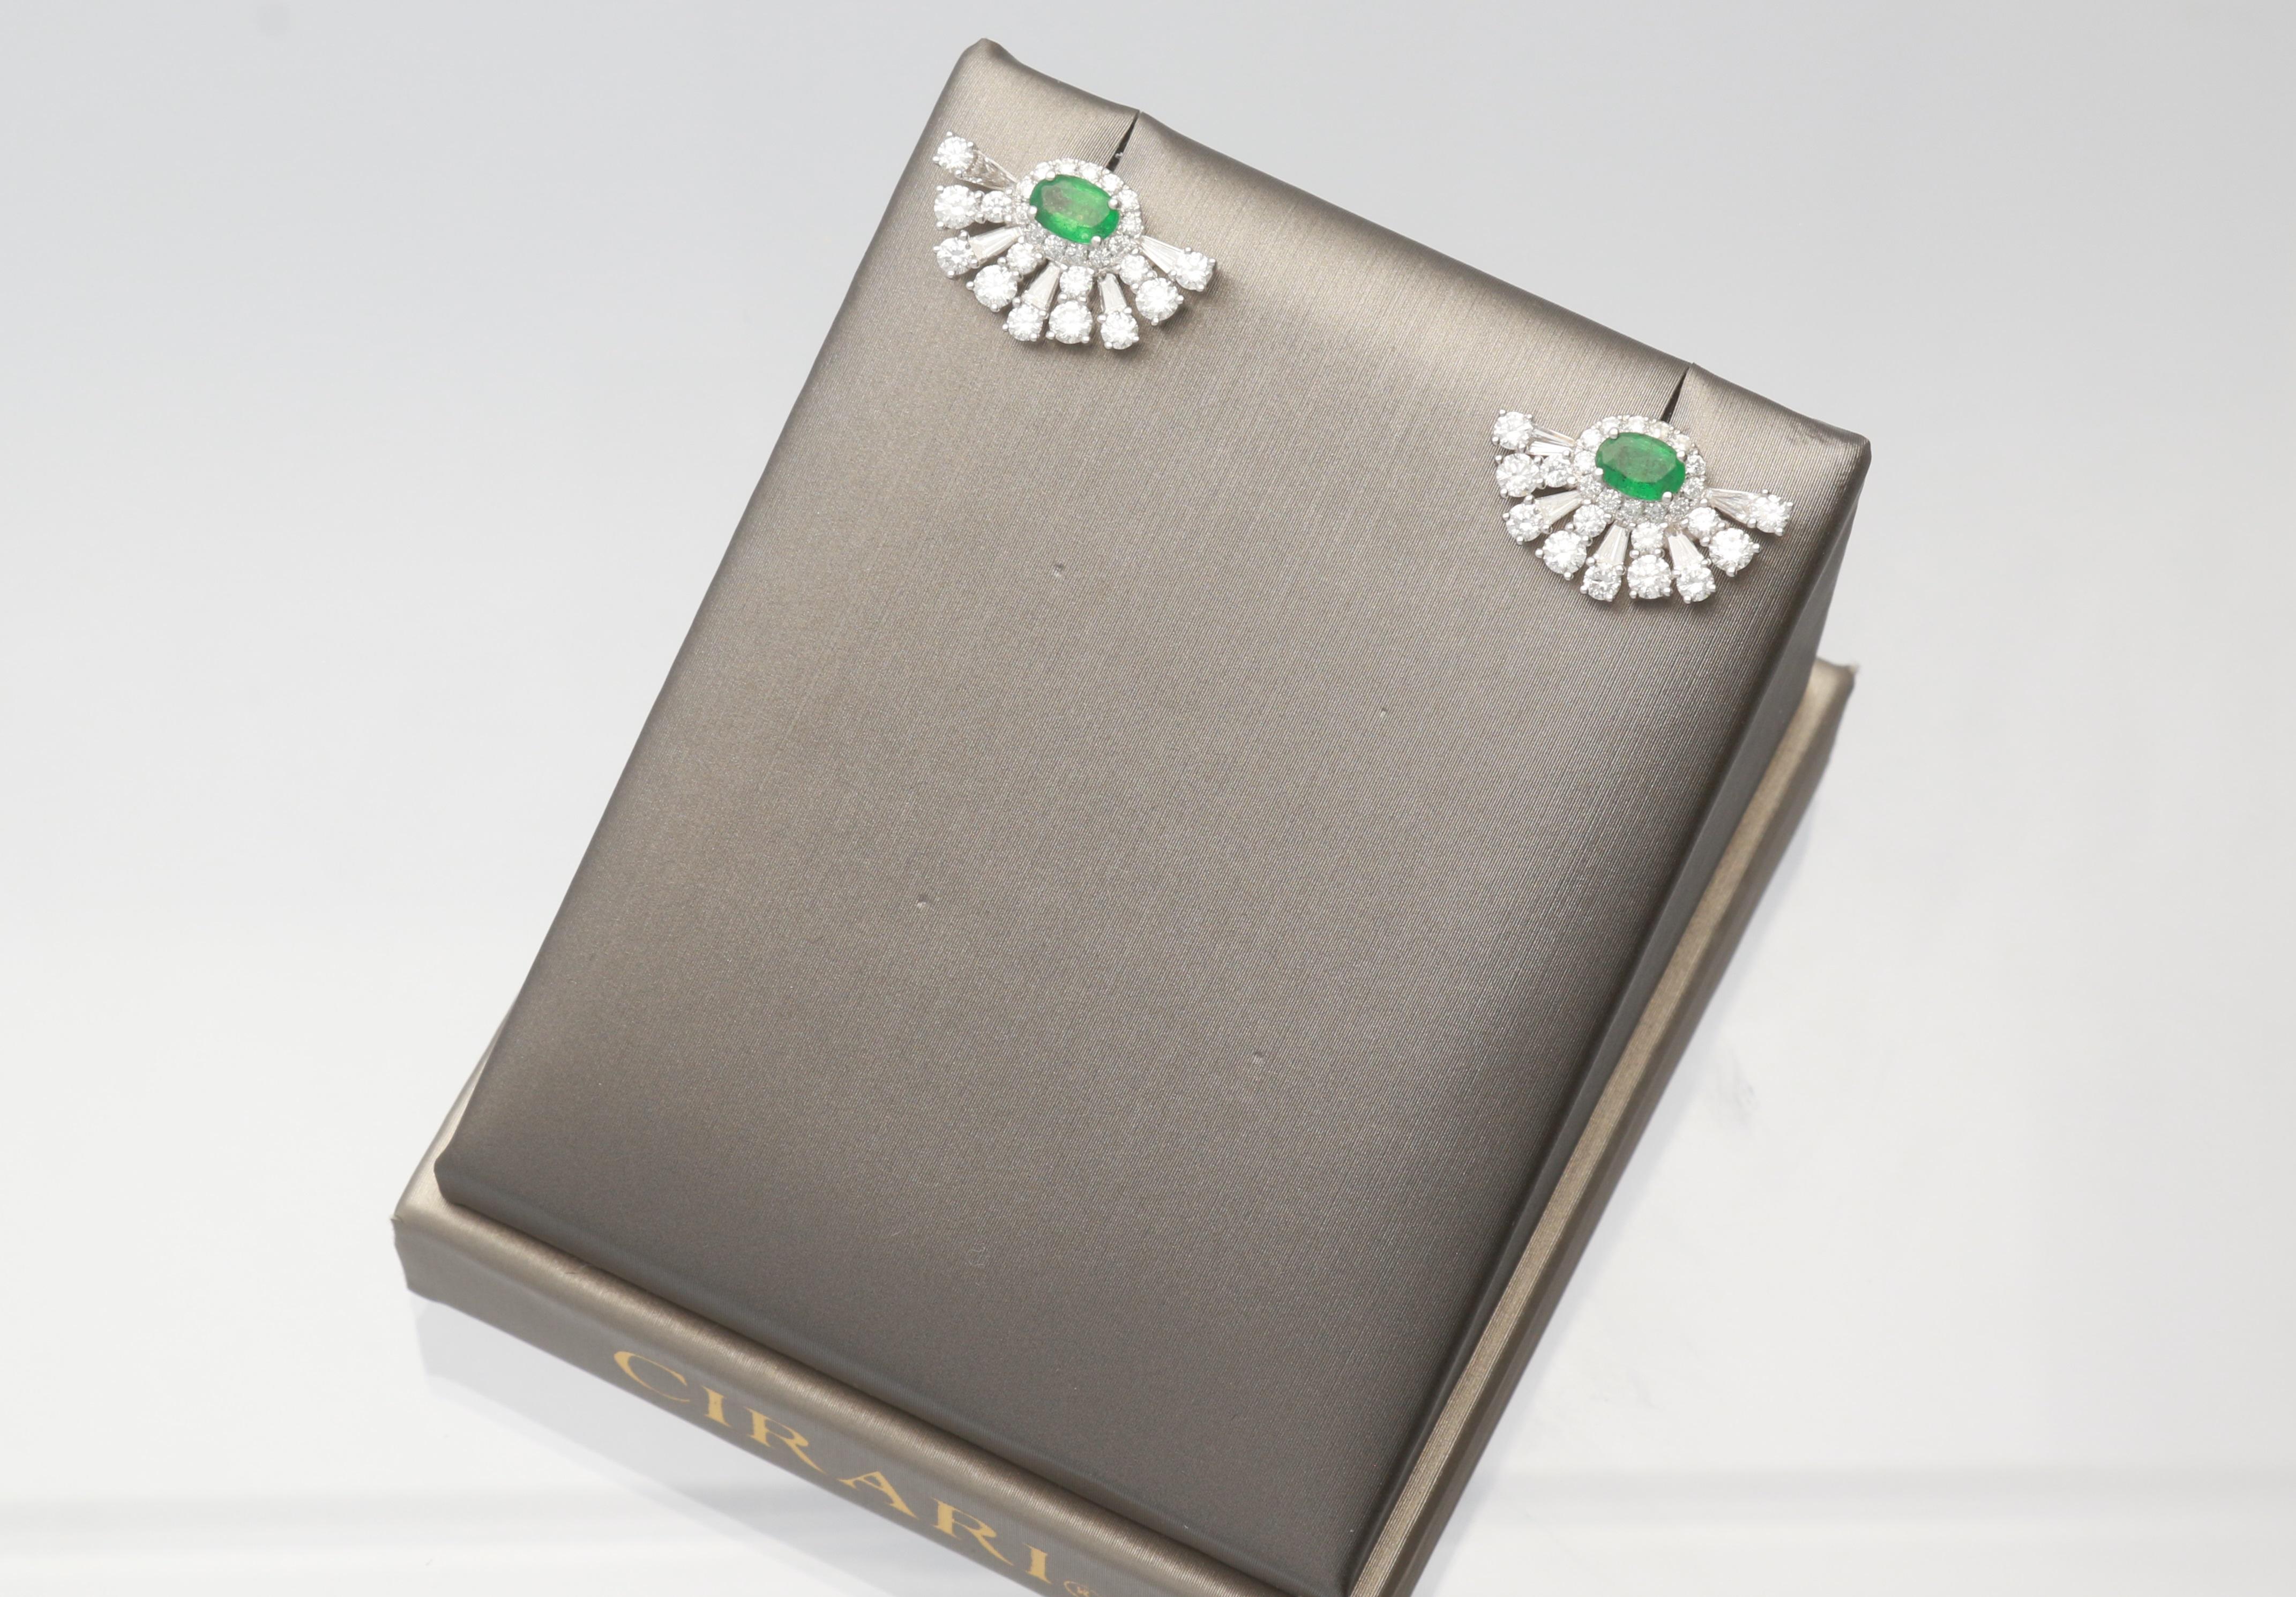 This one of a kind Gin and Grace Earring is crafted in 18-karat White Gold and features 2 oval cut Emeralds 0.86 Carat, 10 Baguette Diamond 0.48 Carat, 8 Round Brilliant cut Diamonds 0.68 Carat  & 44 Round Brilliant cut Diamond 1.10 Carat. This